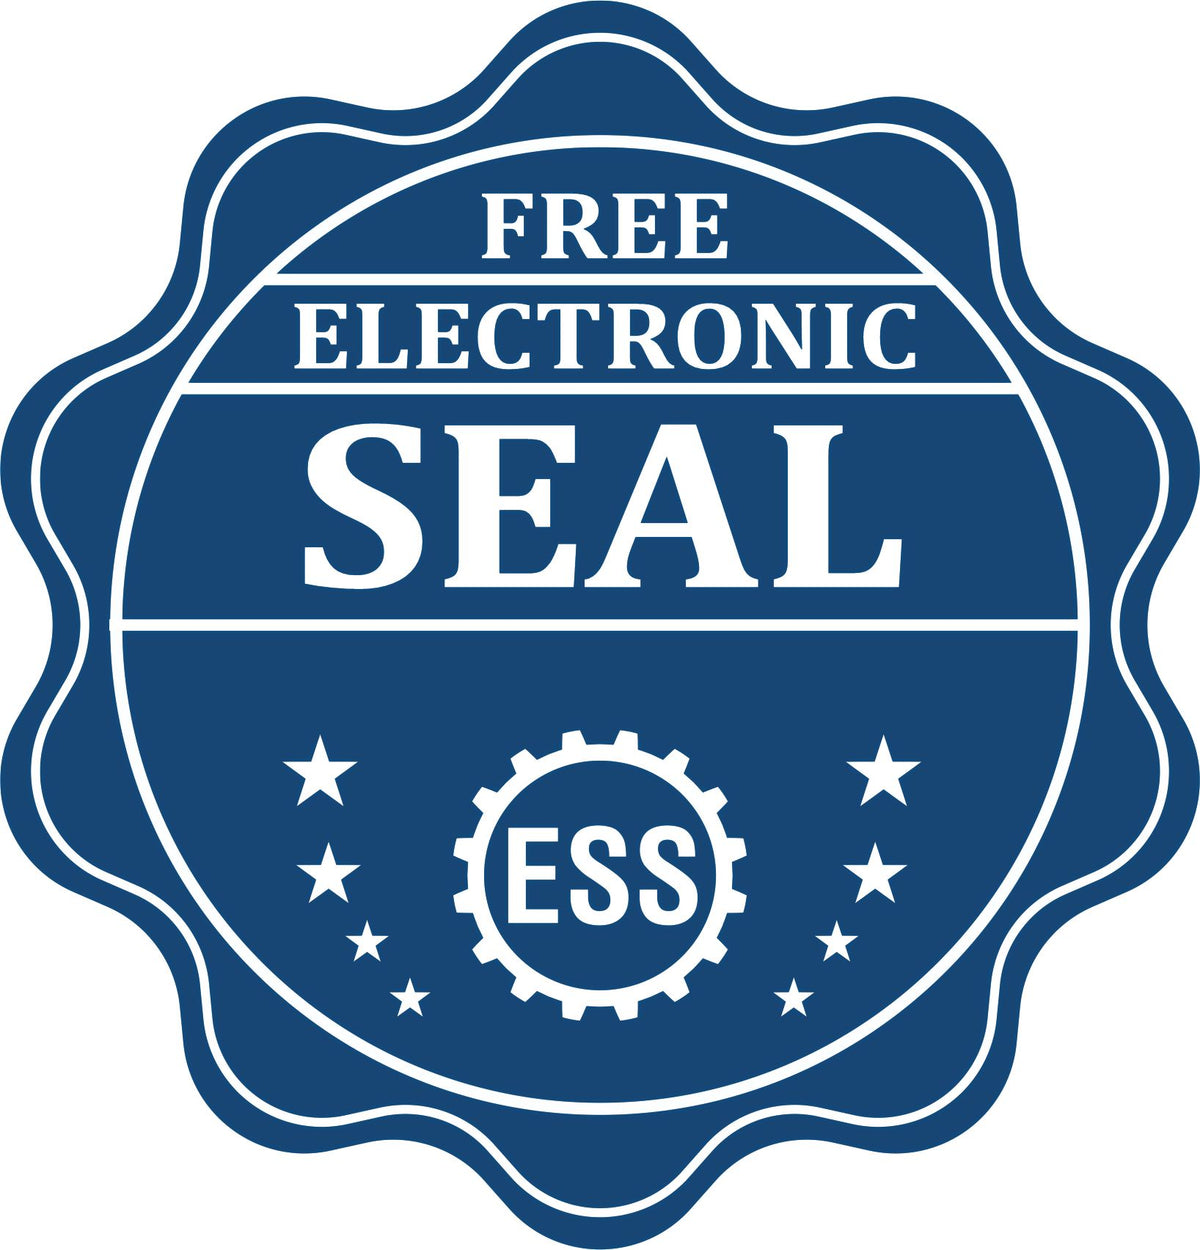 A badge showing a free electronic seal for the Handheld Michigan Professional Geologist Embosser with stars and the ESS gear on the emblem.